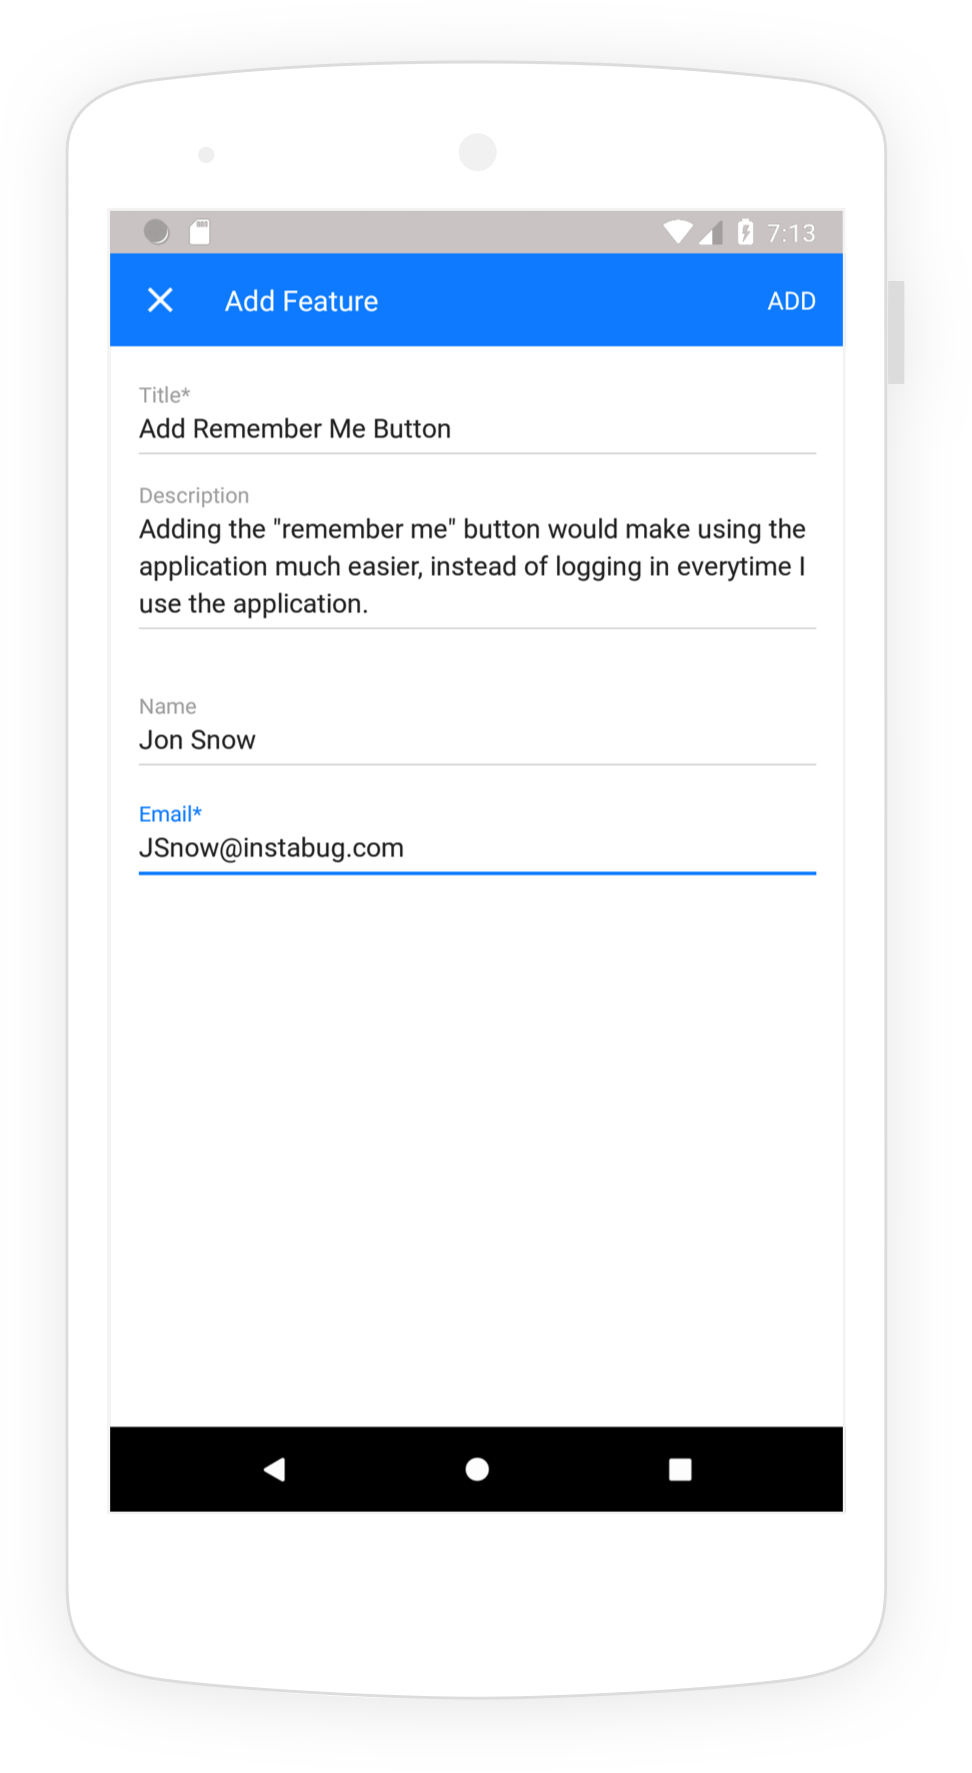 This is what the in-app feature request submission form looks like.